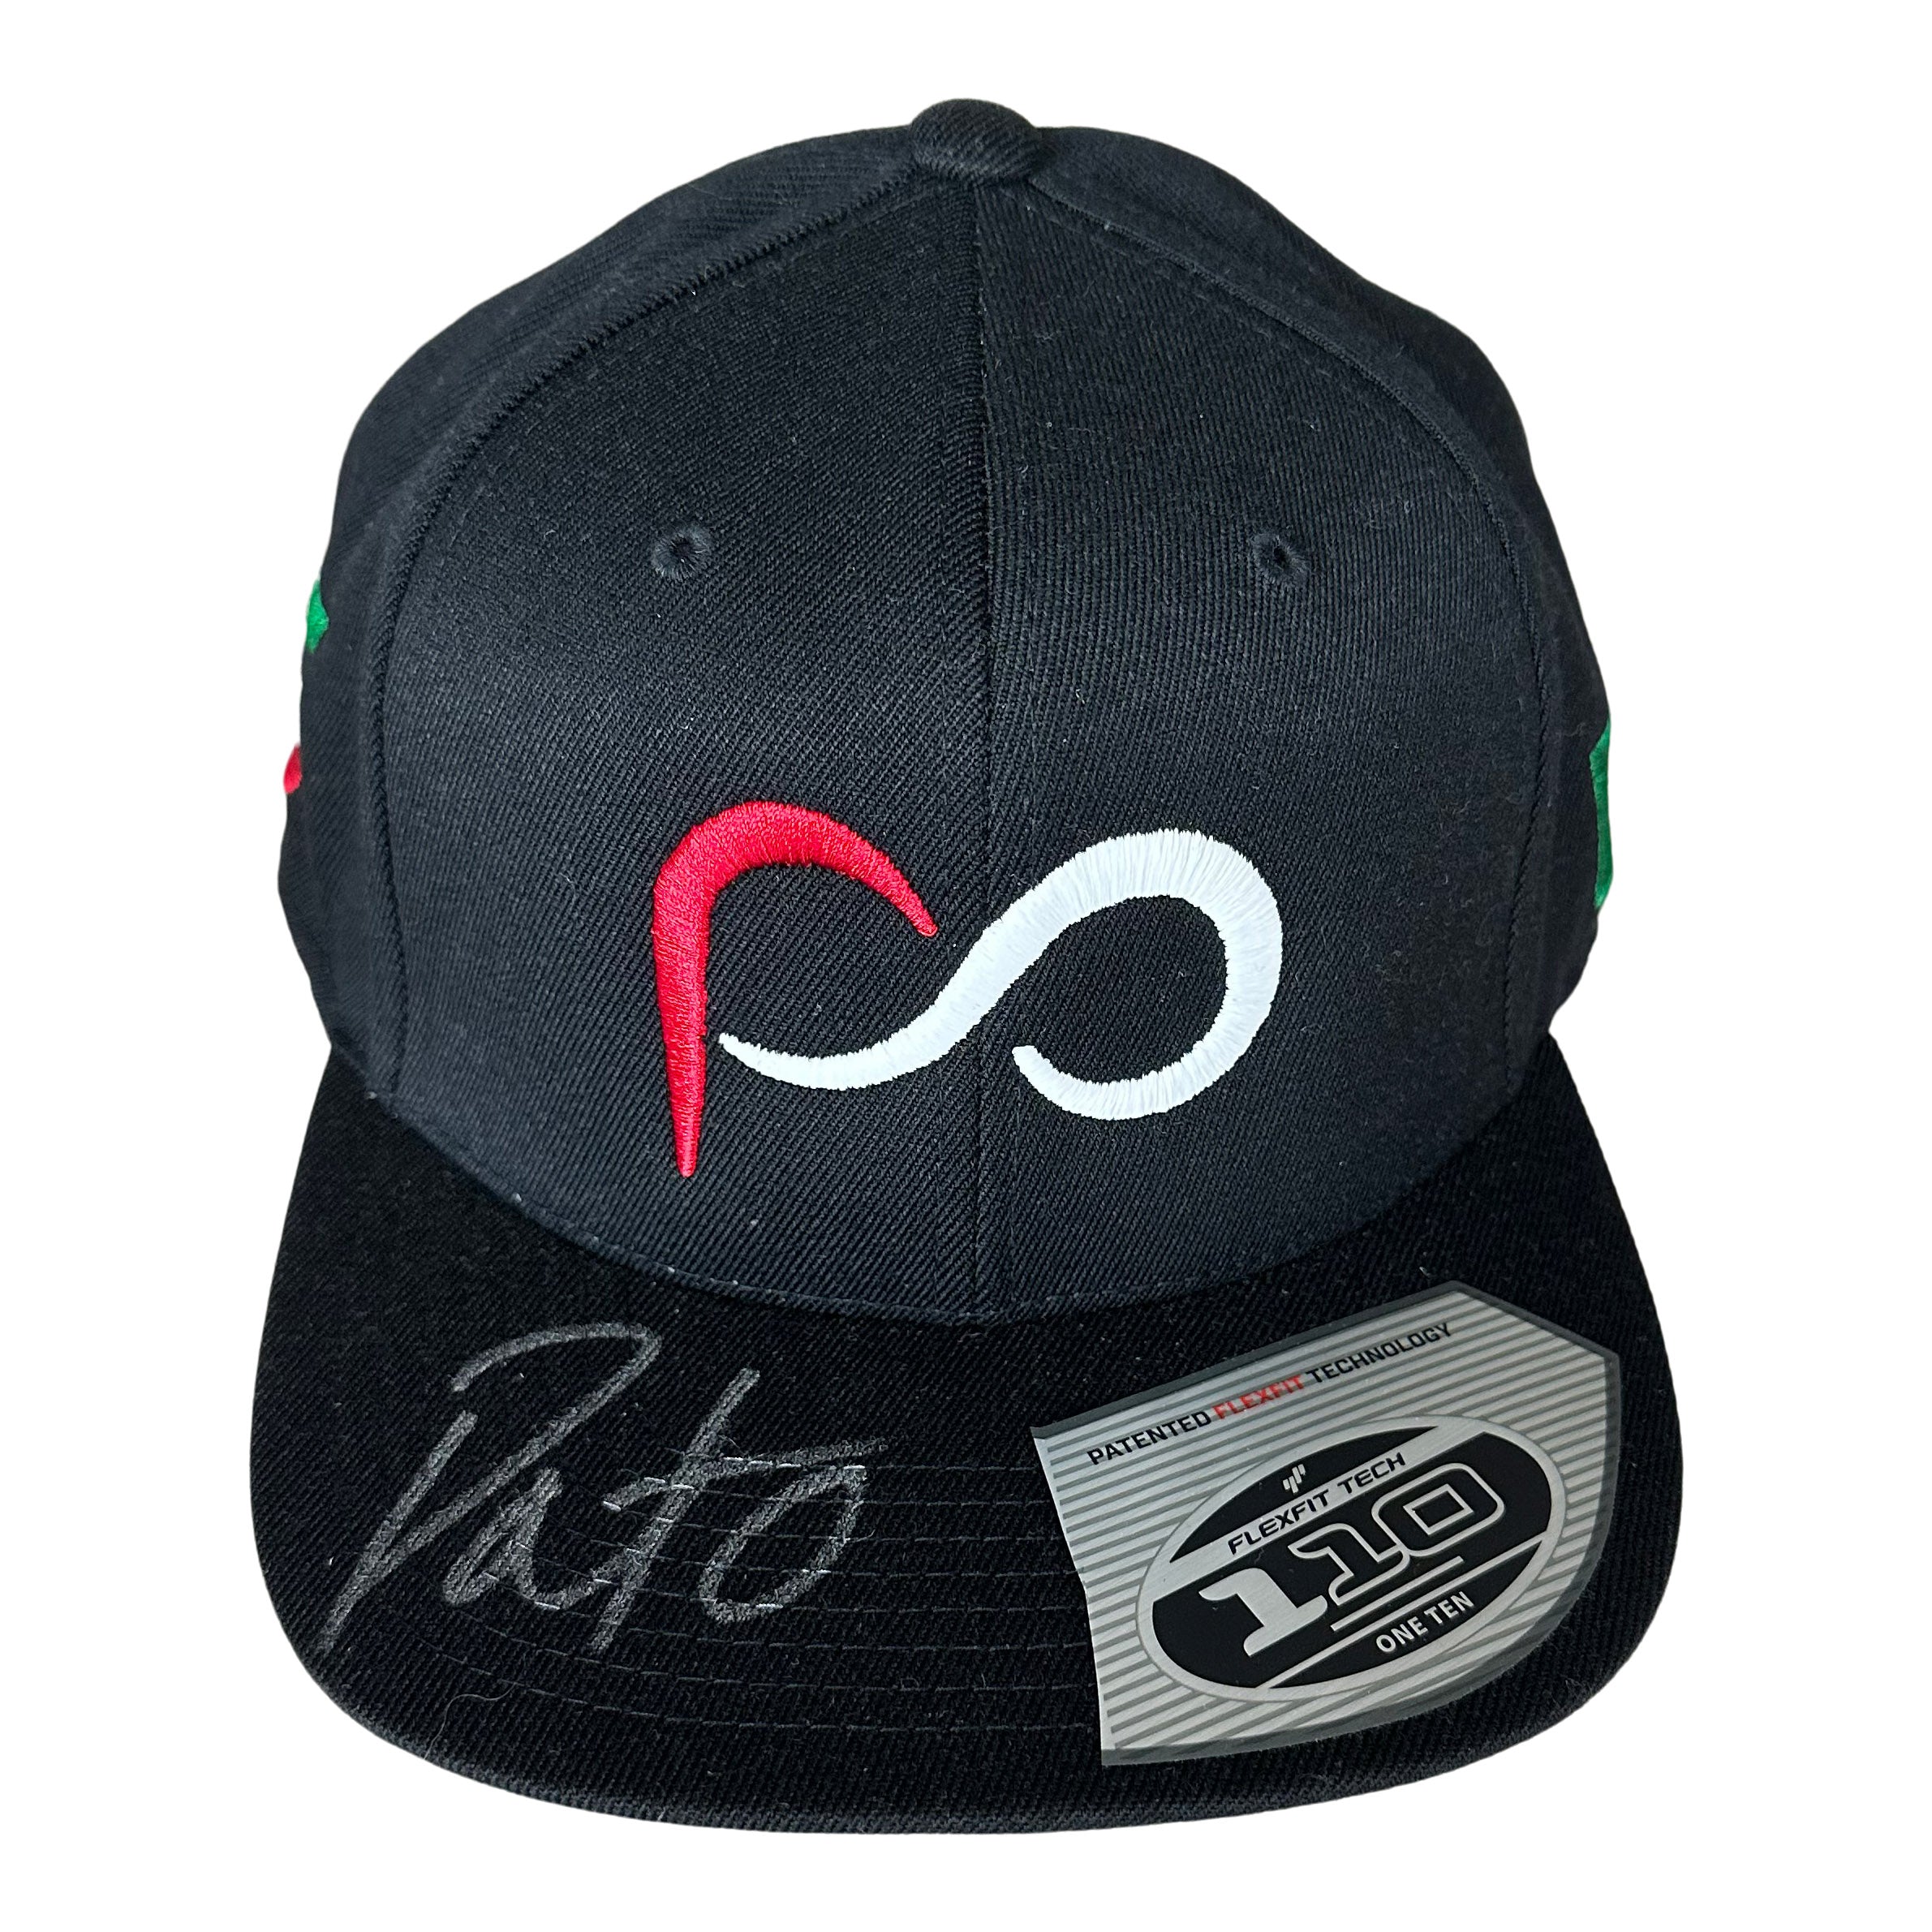 *Autographed* Black Flat Bill Cap with PO logo 3D in front and #5 tricolor on side